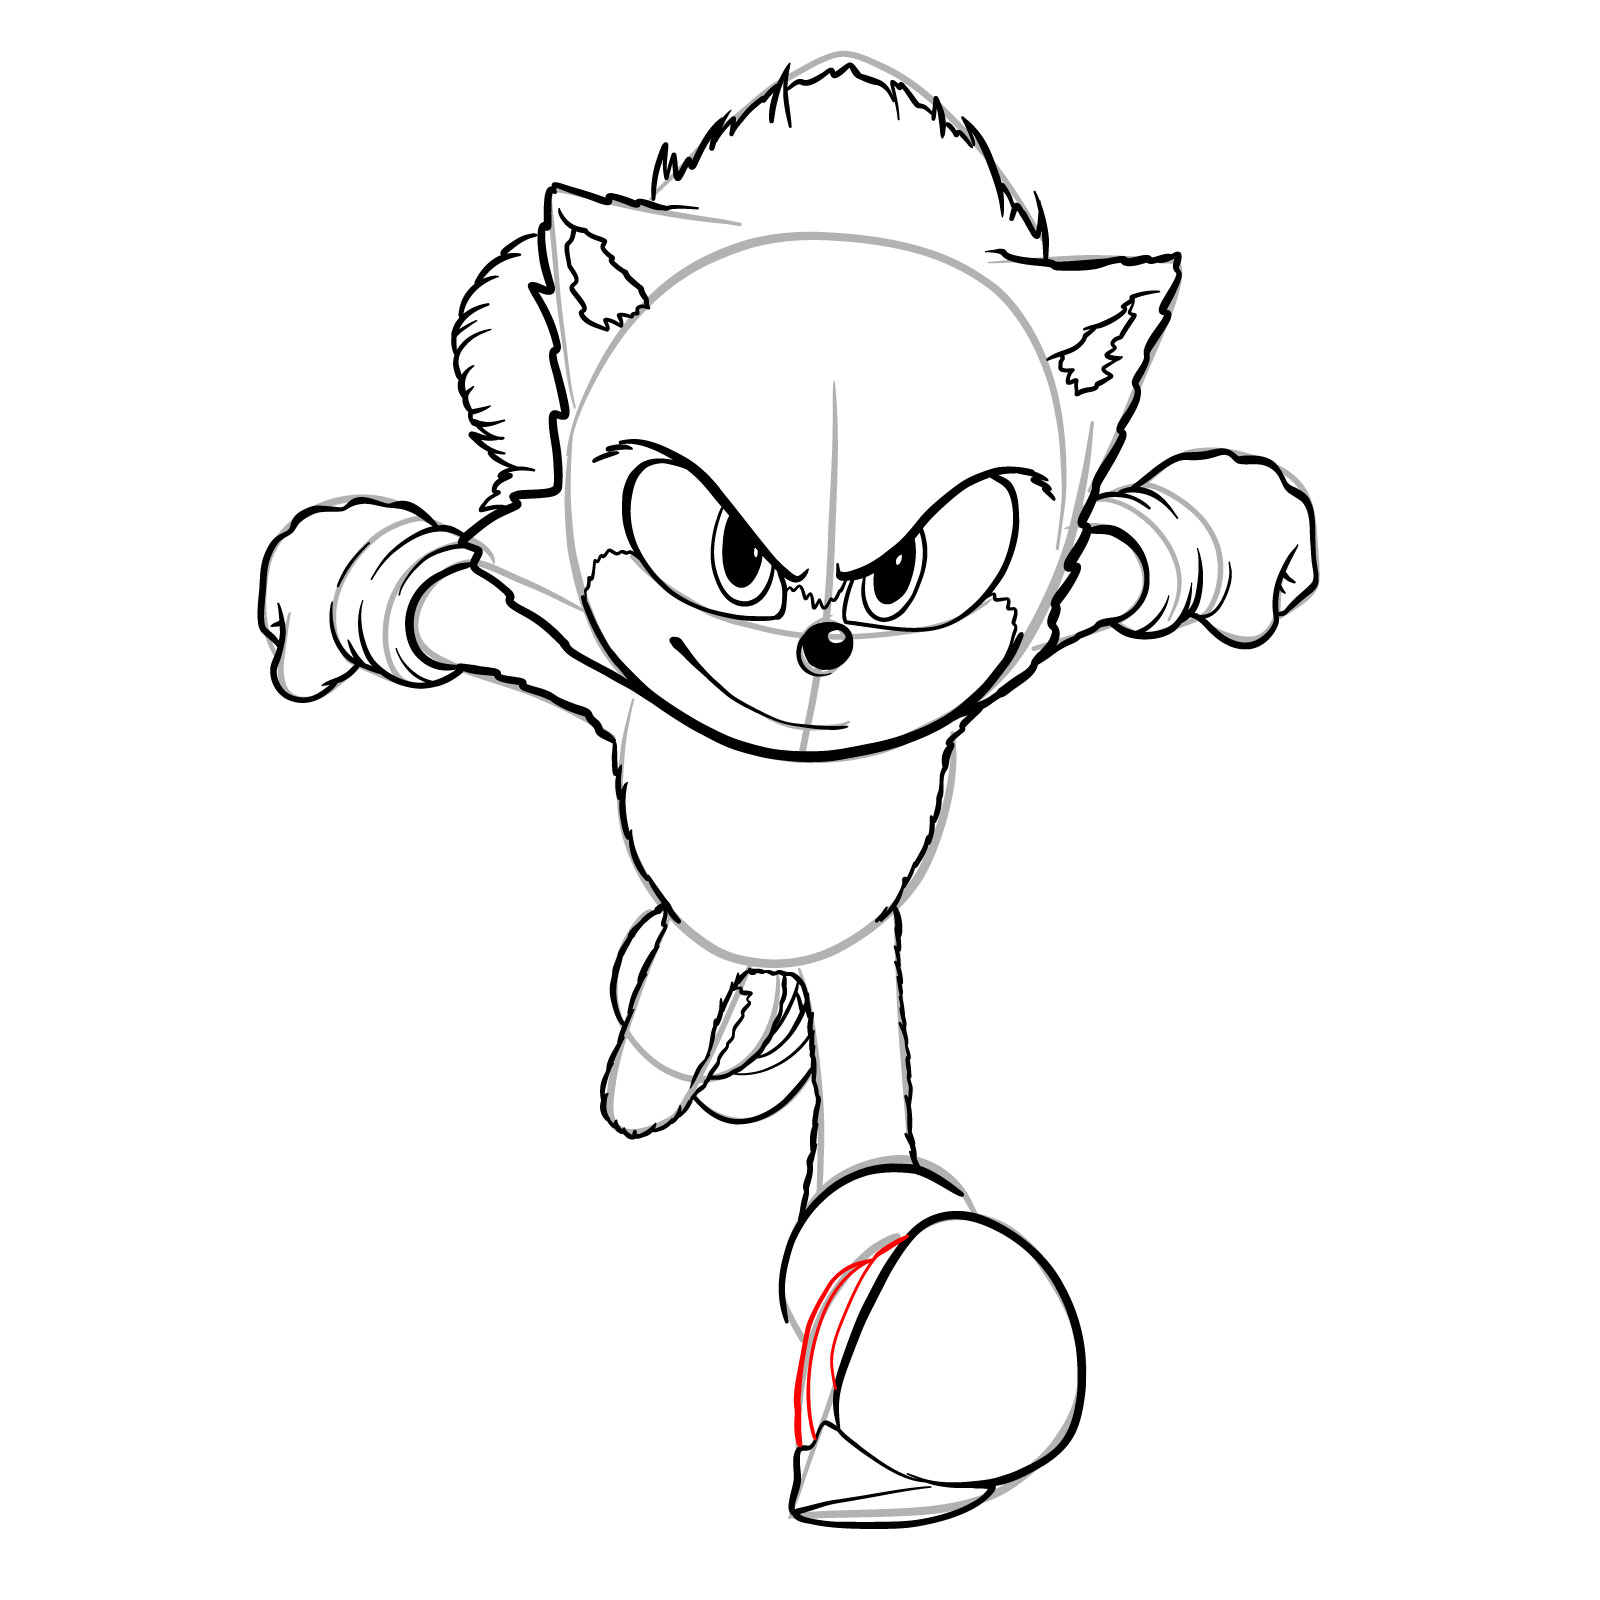 How to draw Sonic from the movie - step 27